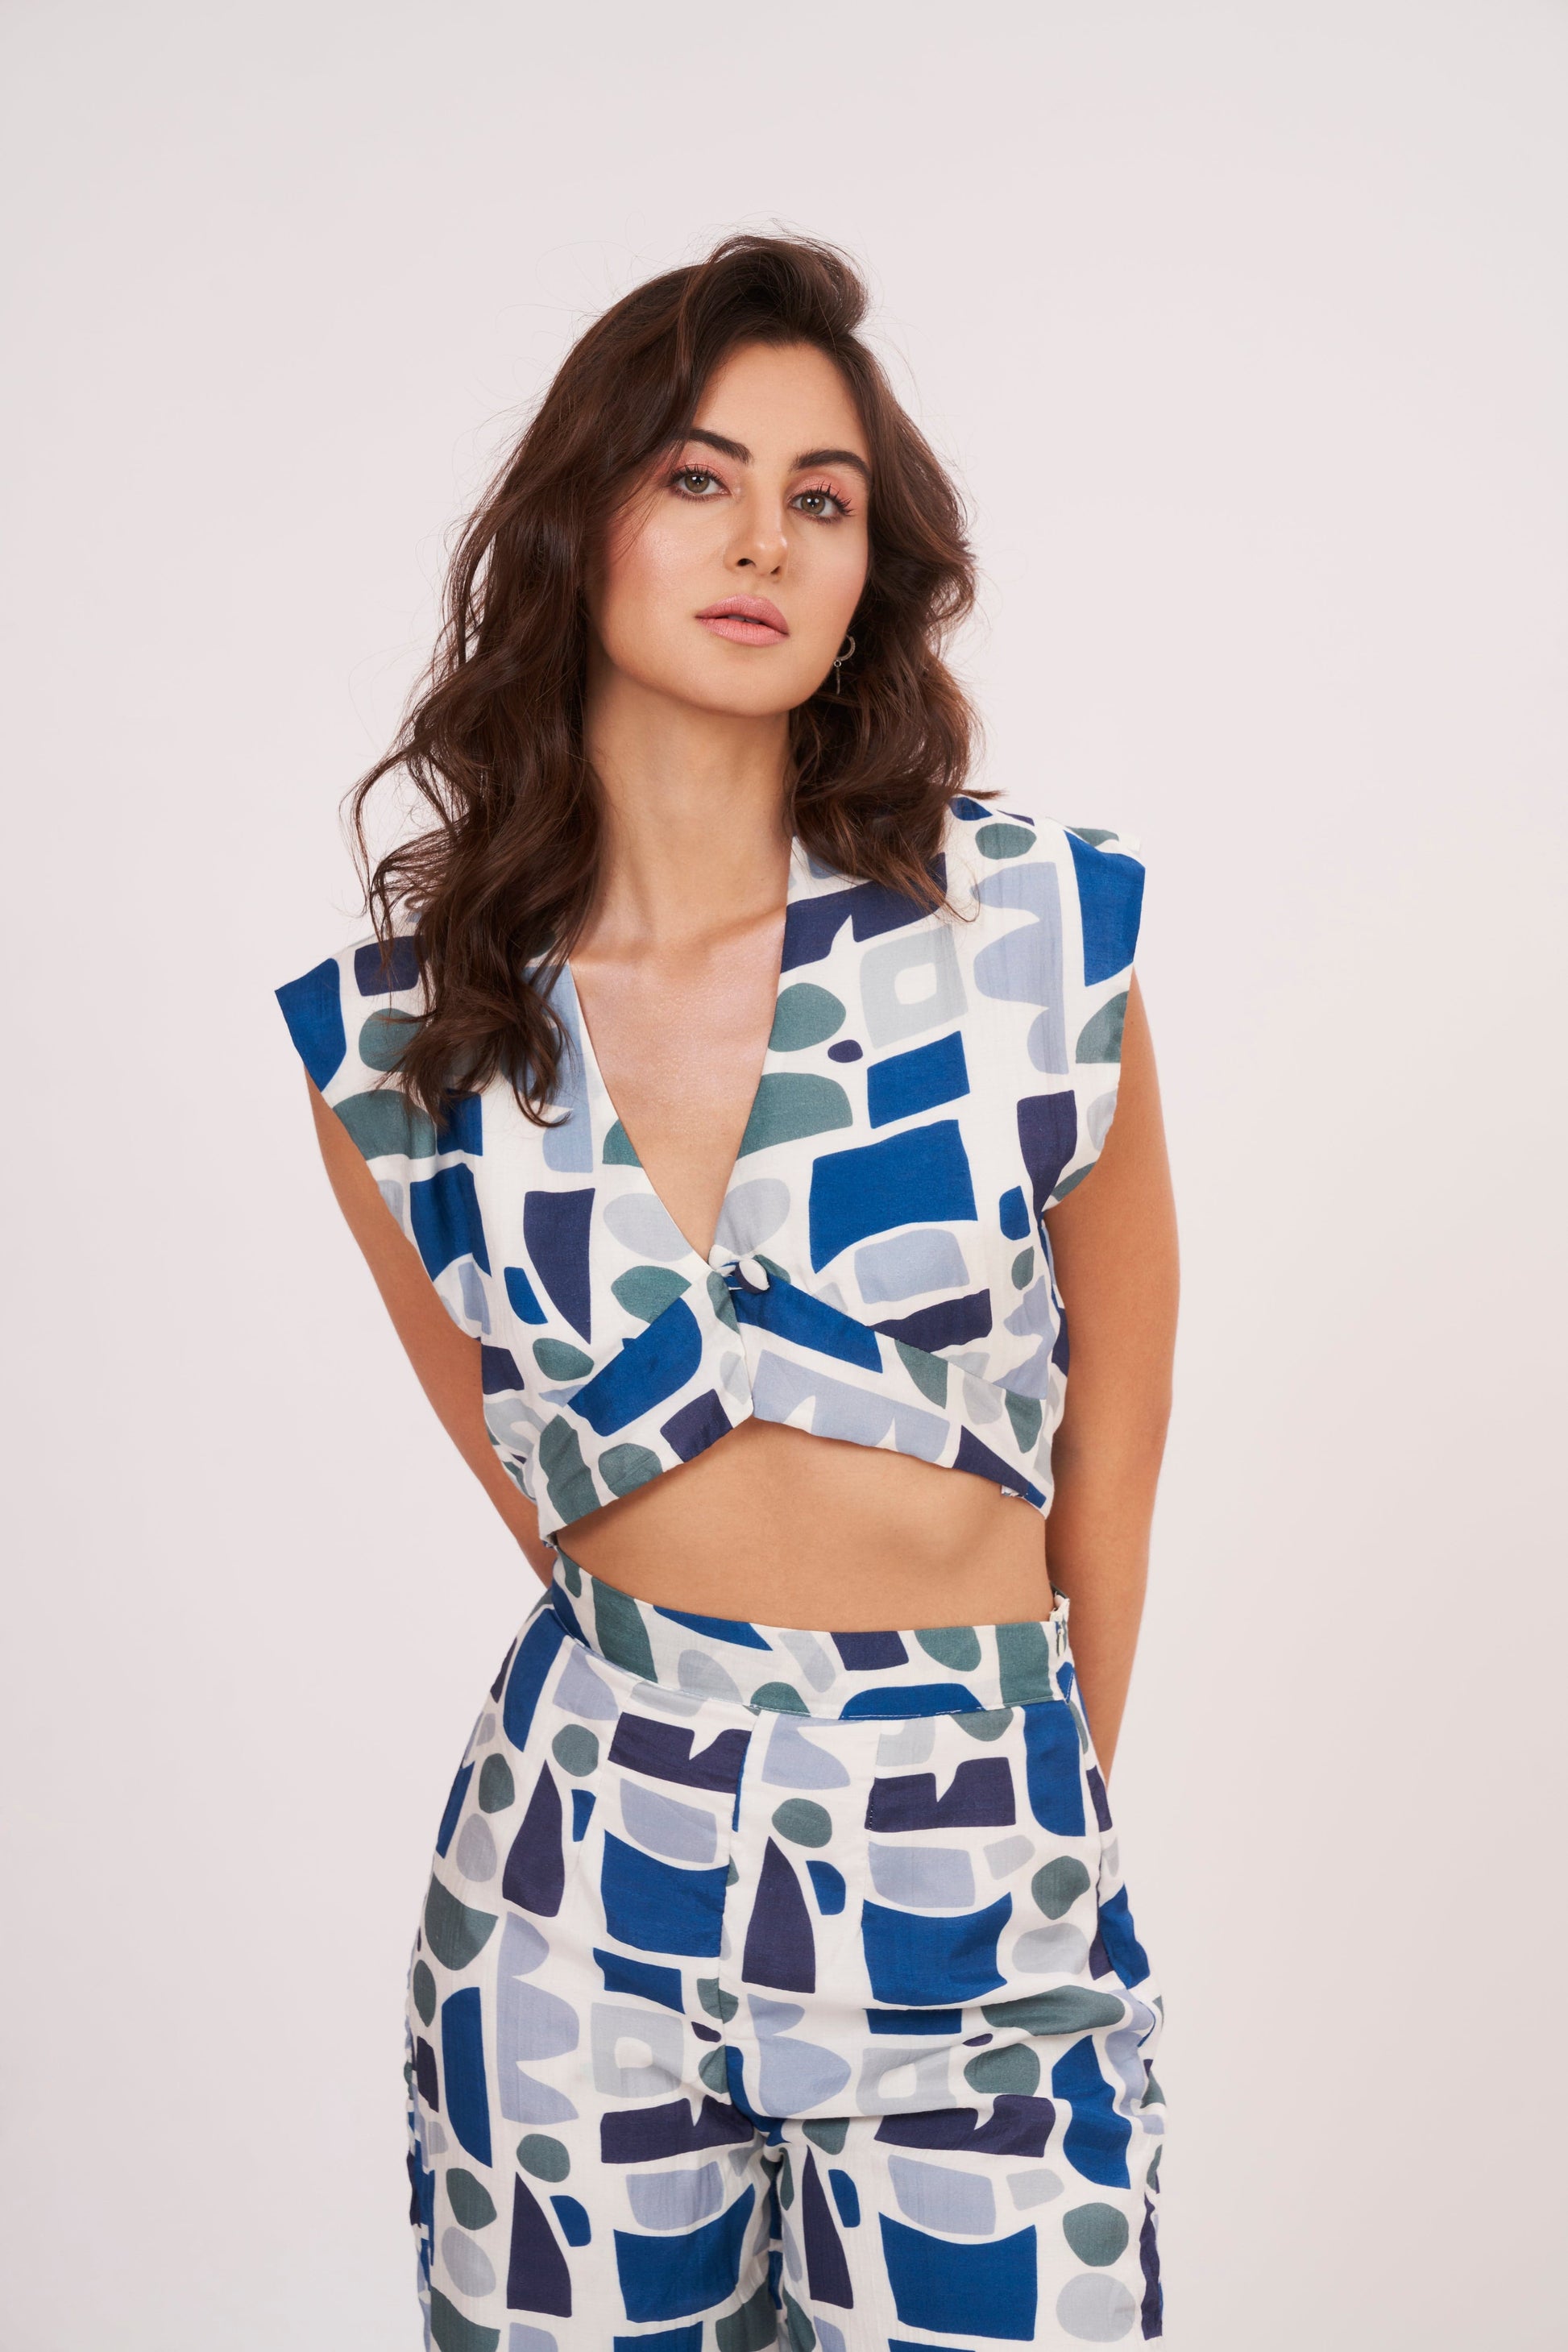 Image of a printed crop top from Designer Co Ord Set made from premium muslin fabric. Trendy v-neck and bold geometric design in vibrant colors.